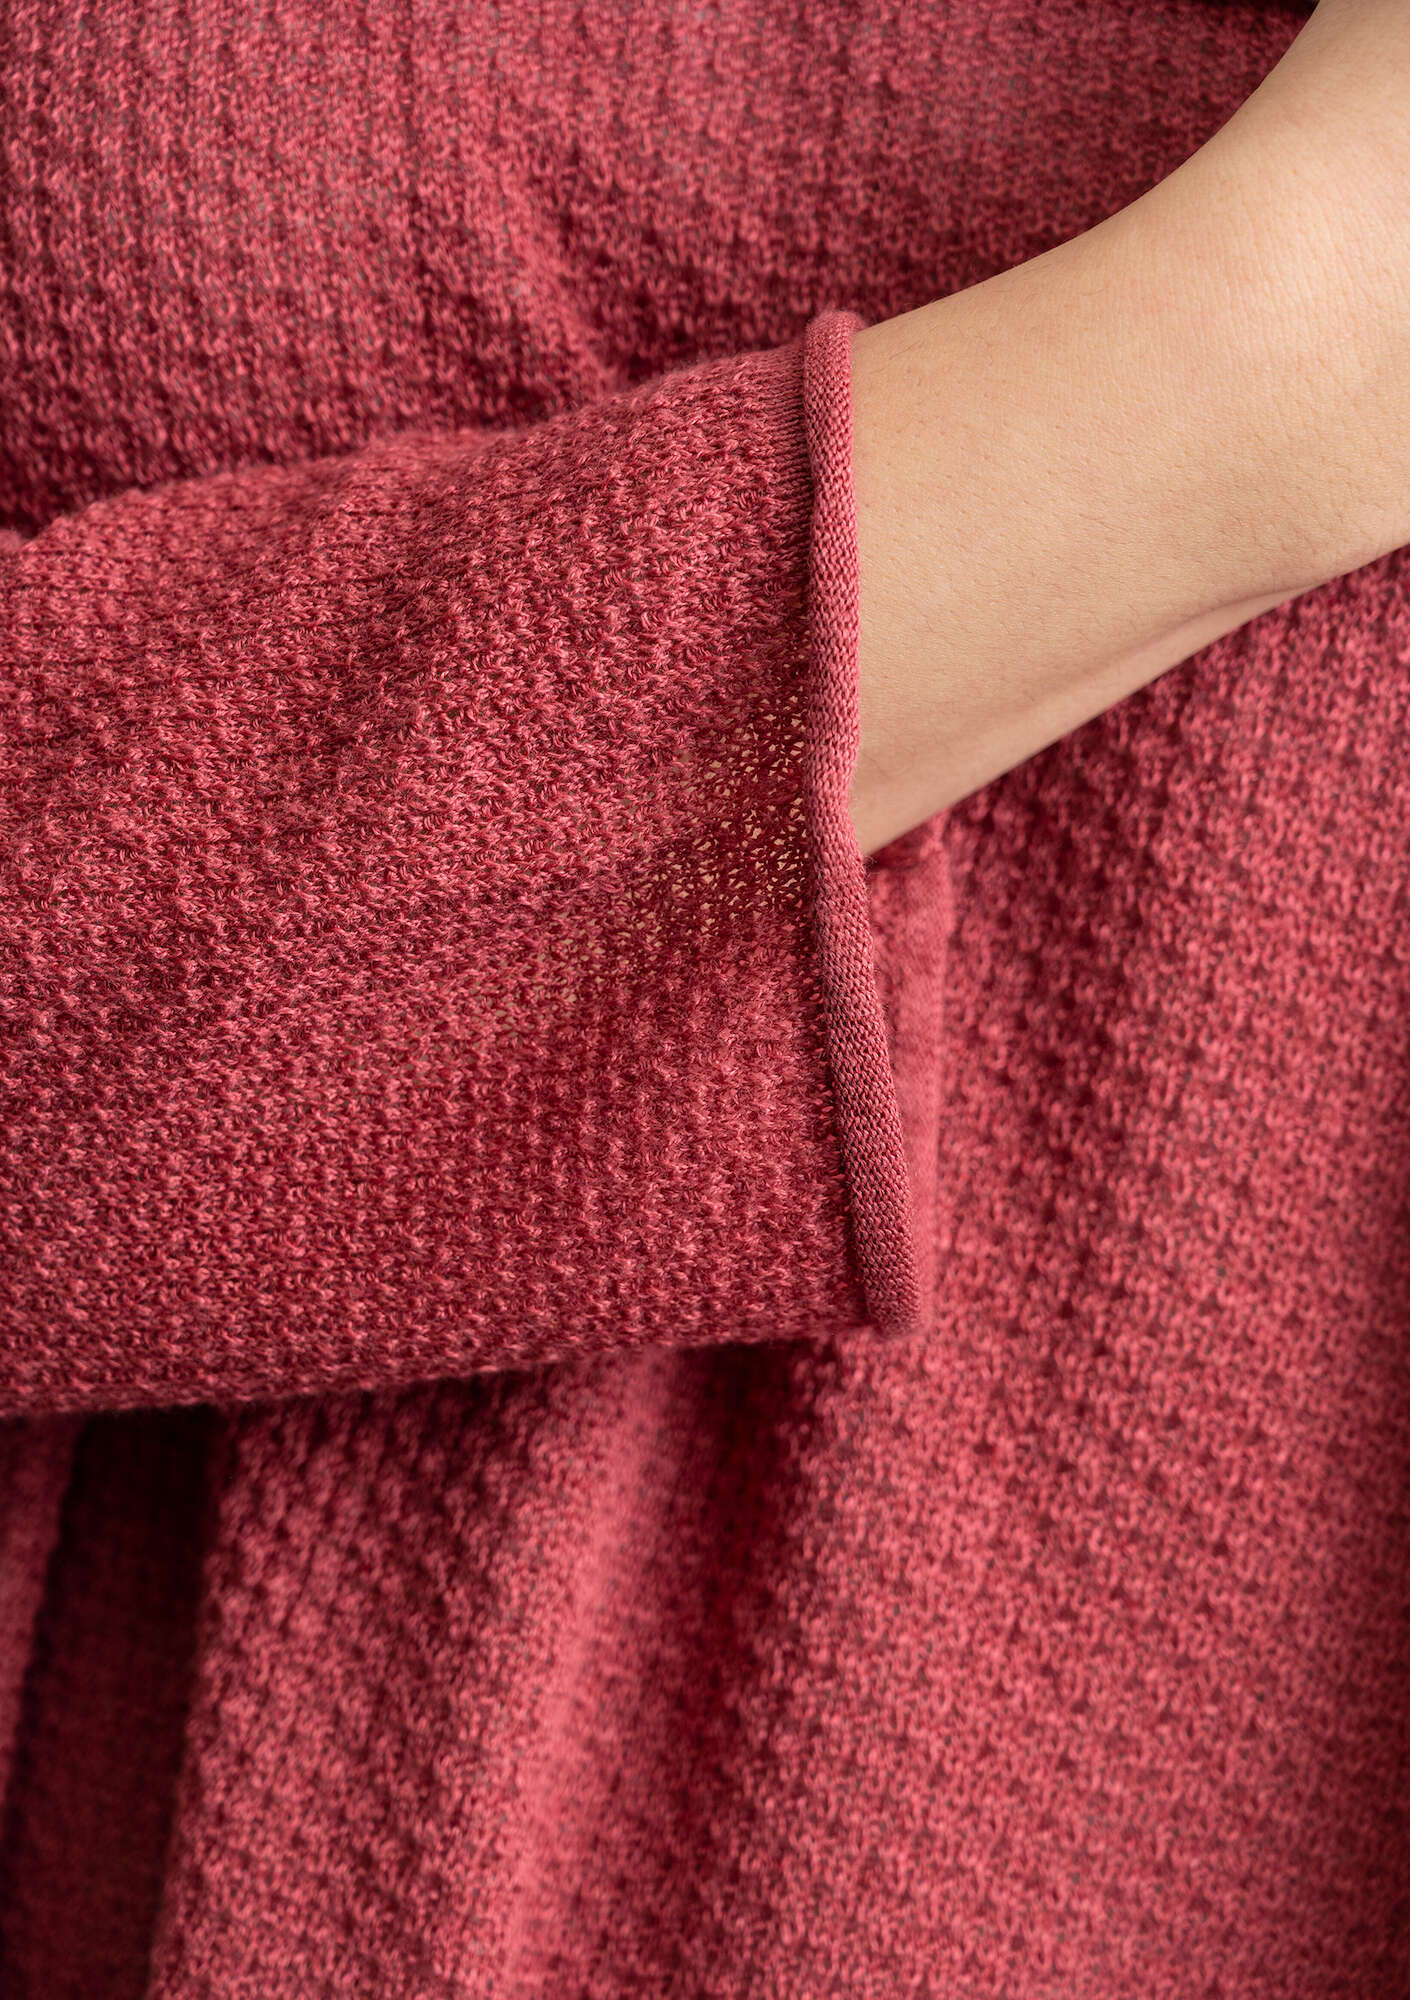 Tunic in a recycled linen knit fabric fig